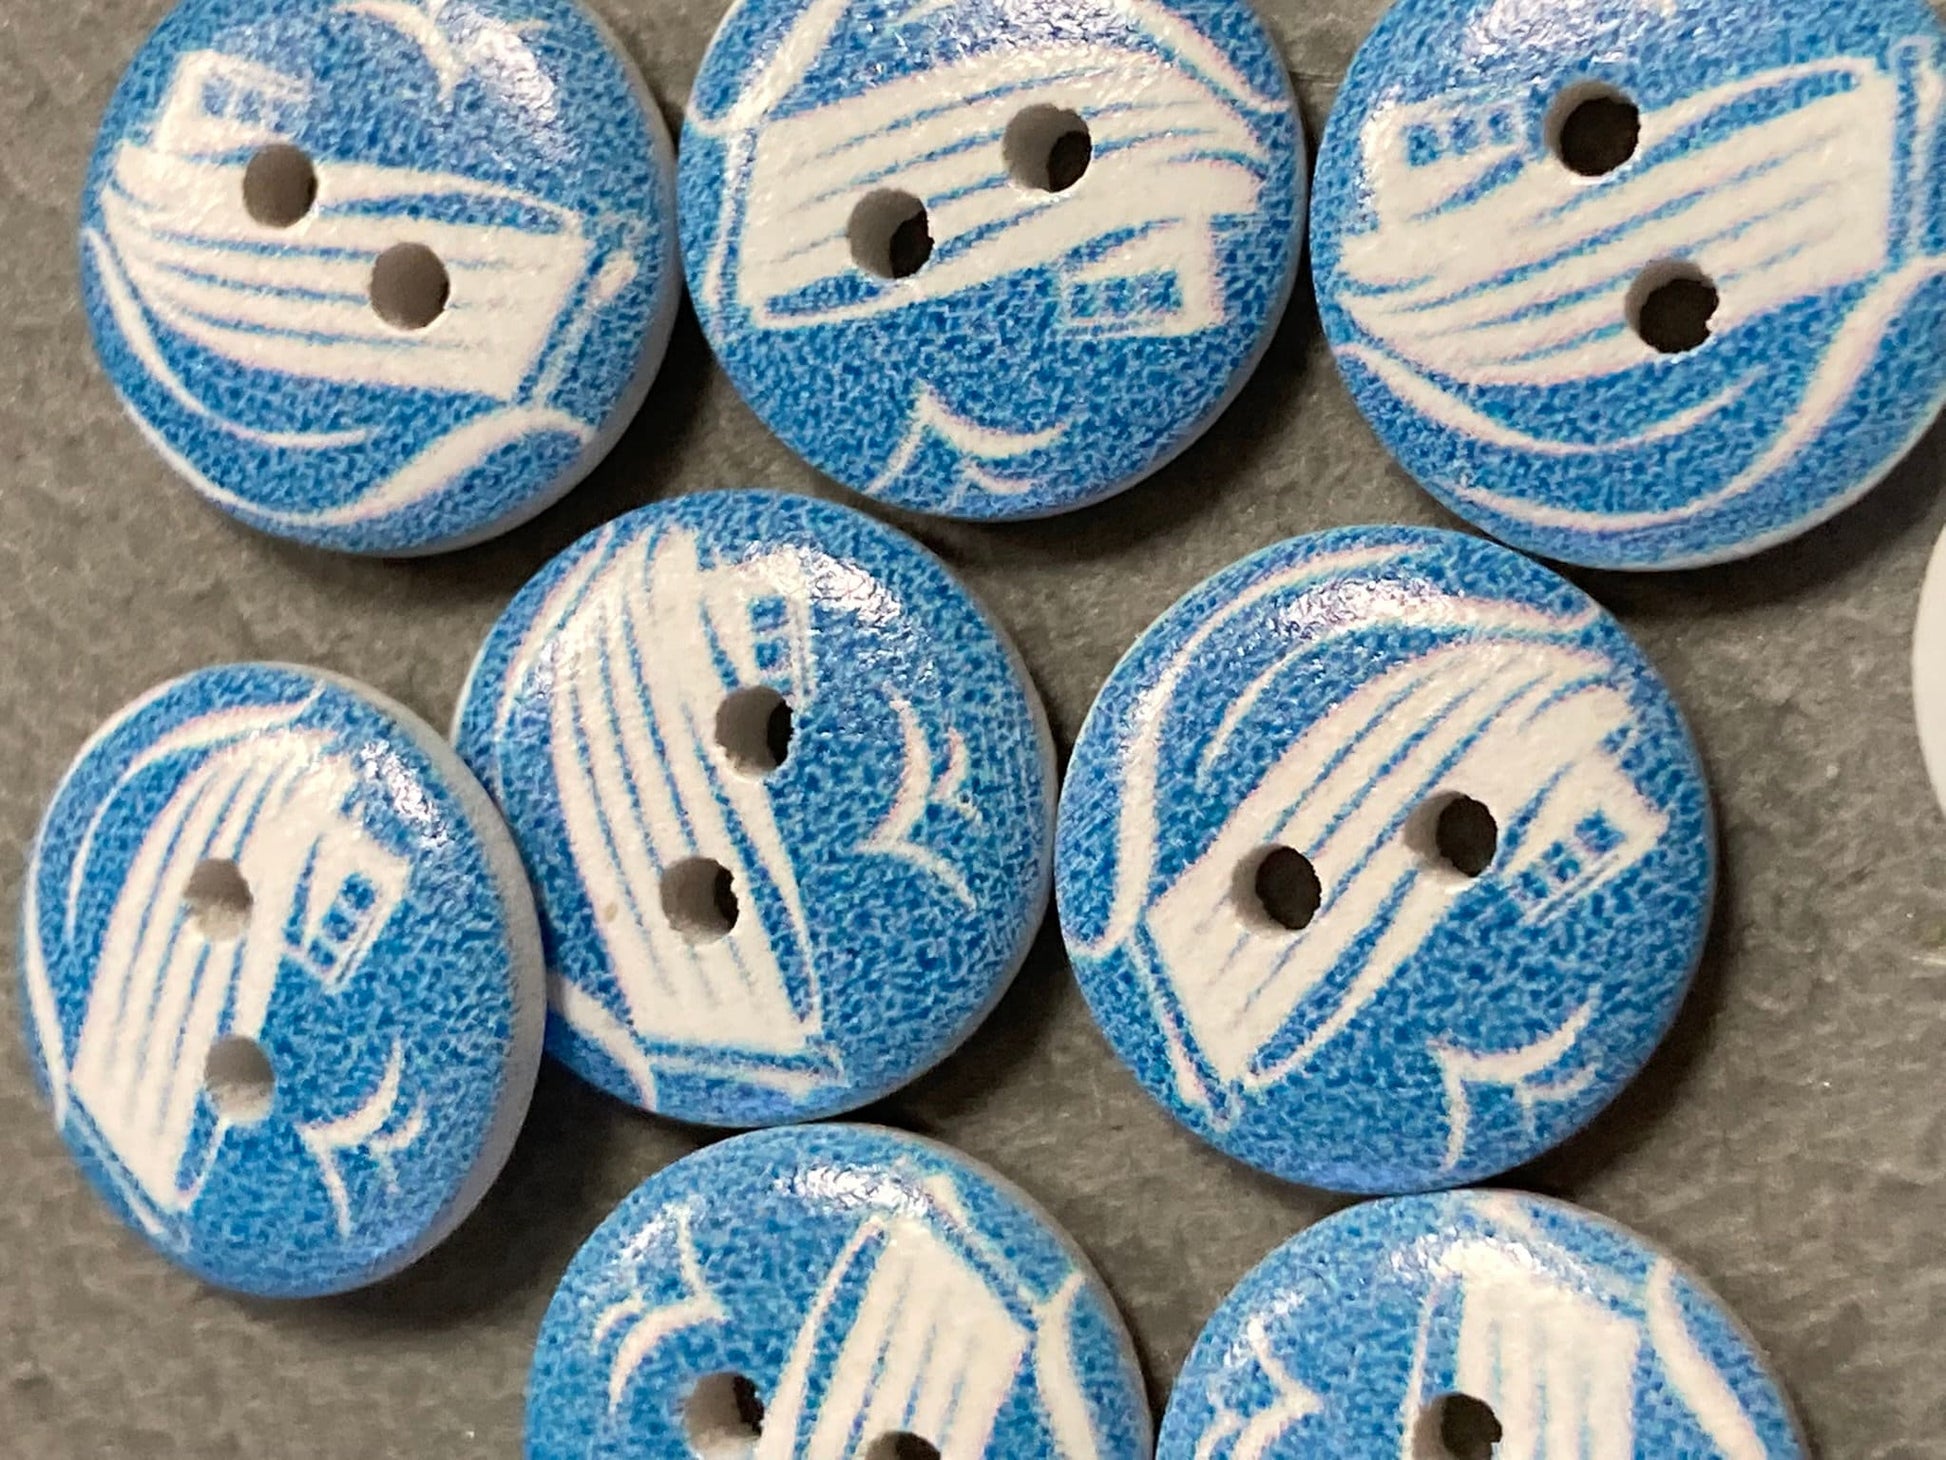 big boat ship 10 buttons x 16mm round plastic Blue & White nautical buttons (all one design)